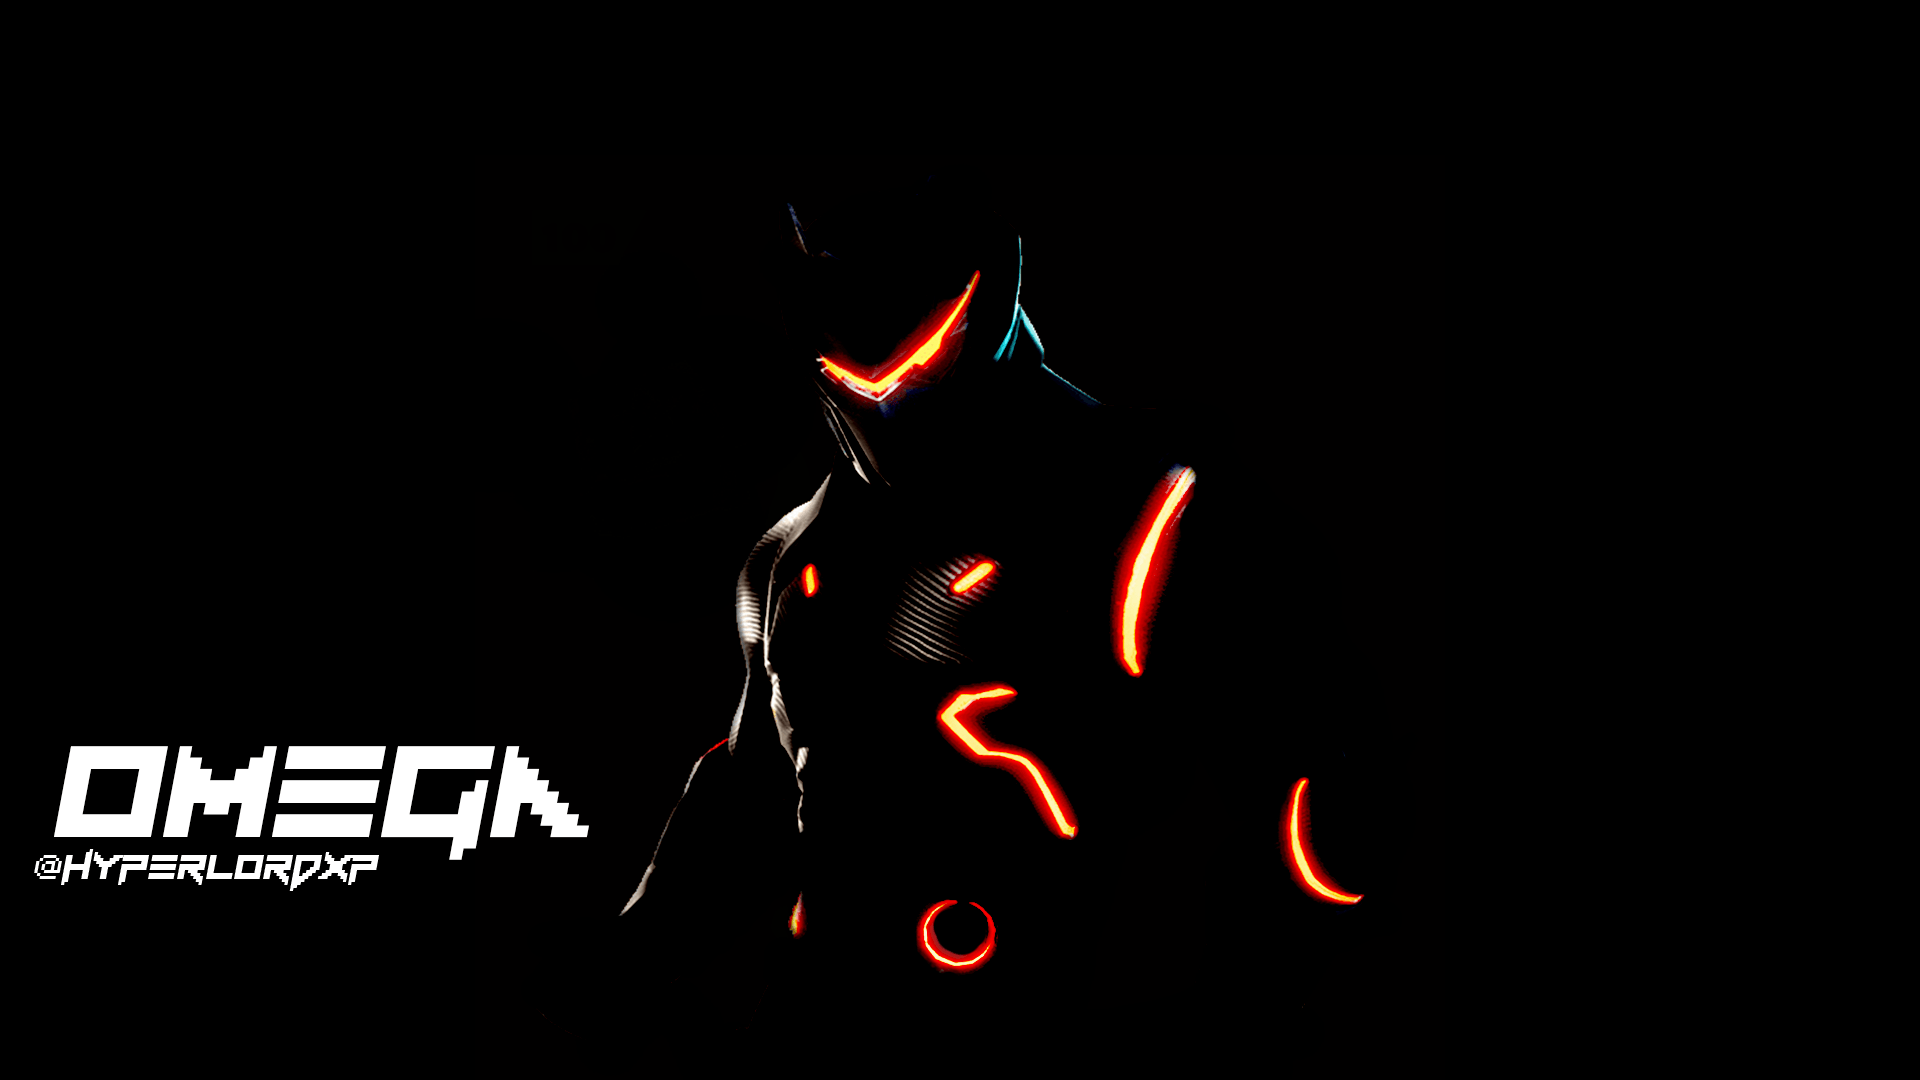 Made a wallpaper from the Omega battle pass icon thingy, I'm not